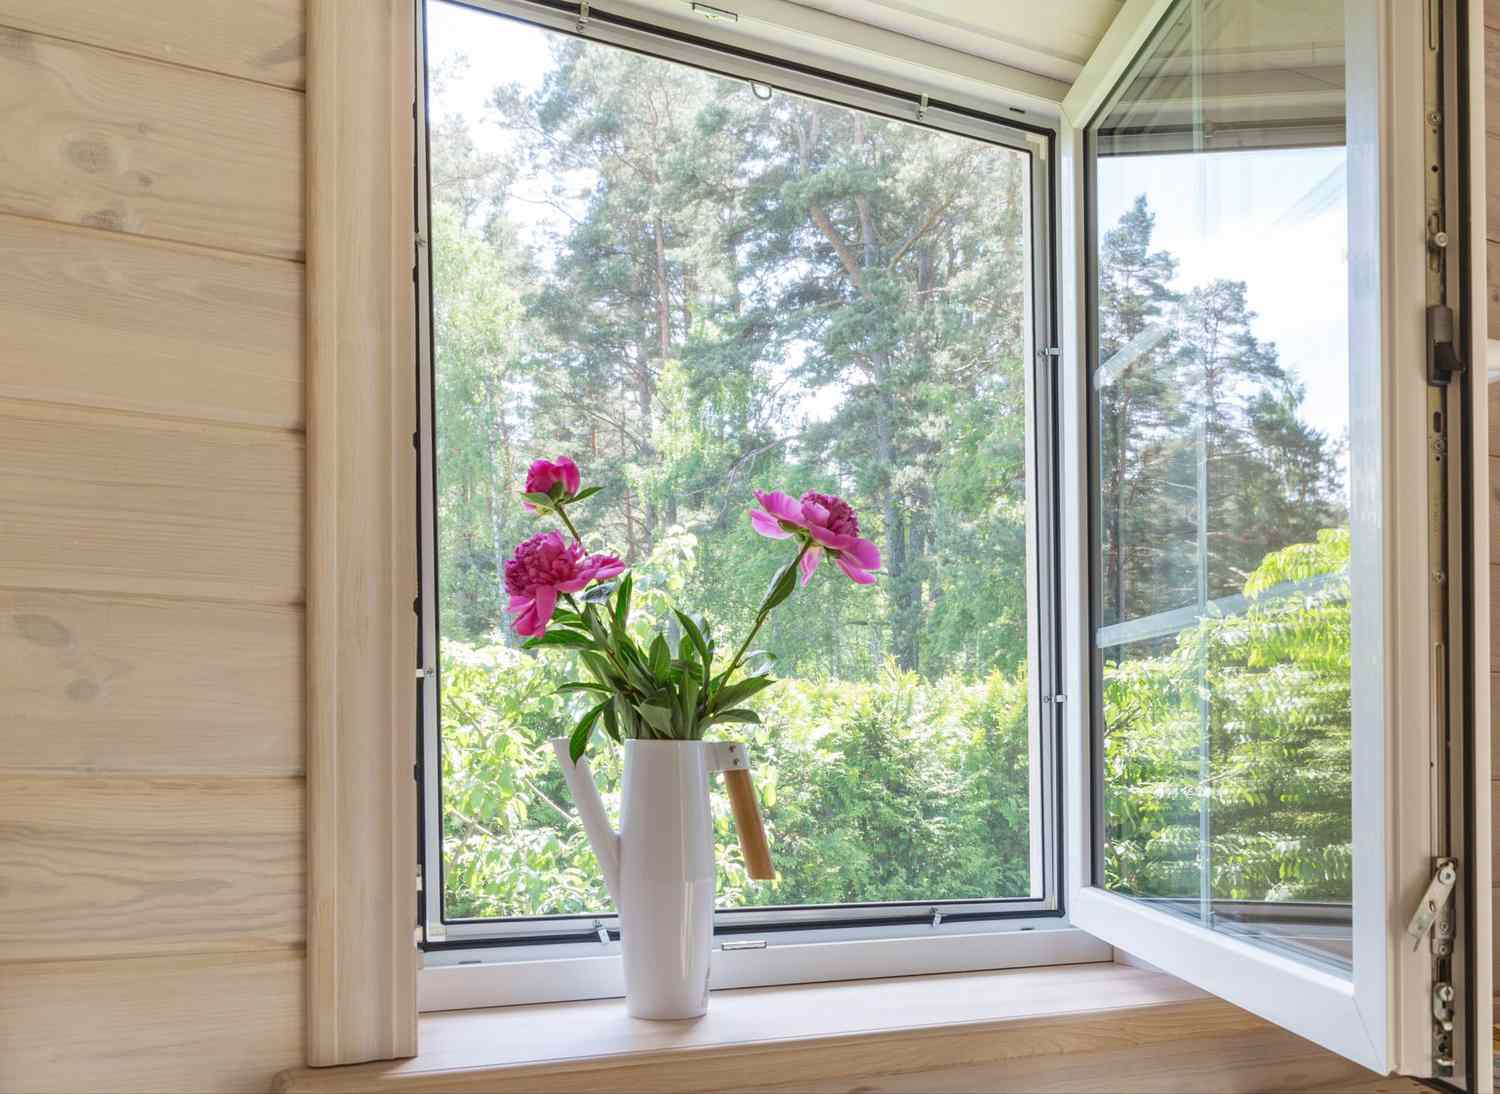 White window with mosquito net in a rustic wooden house overlooking the garden. Bouquet of pink peonies in watering can on the windowsill